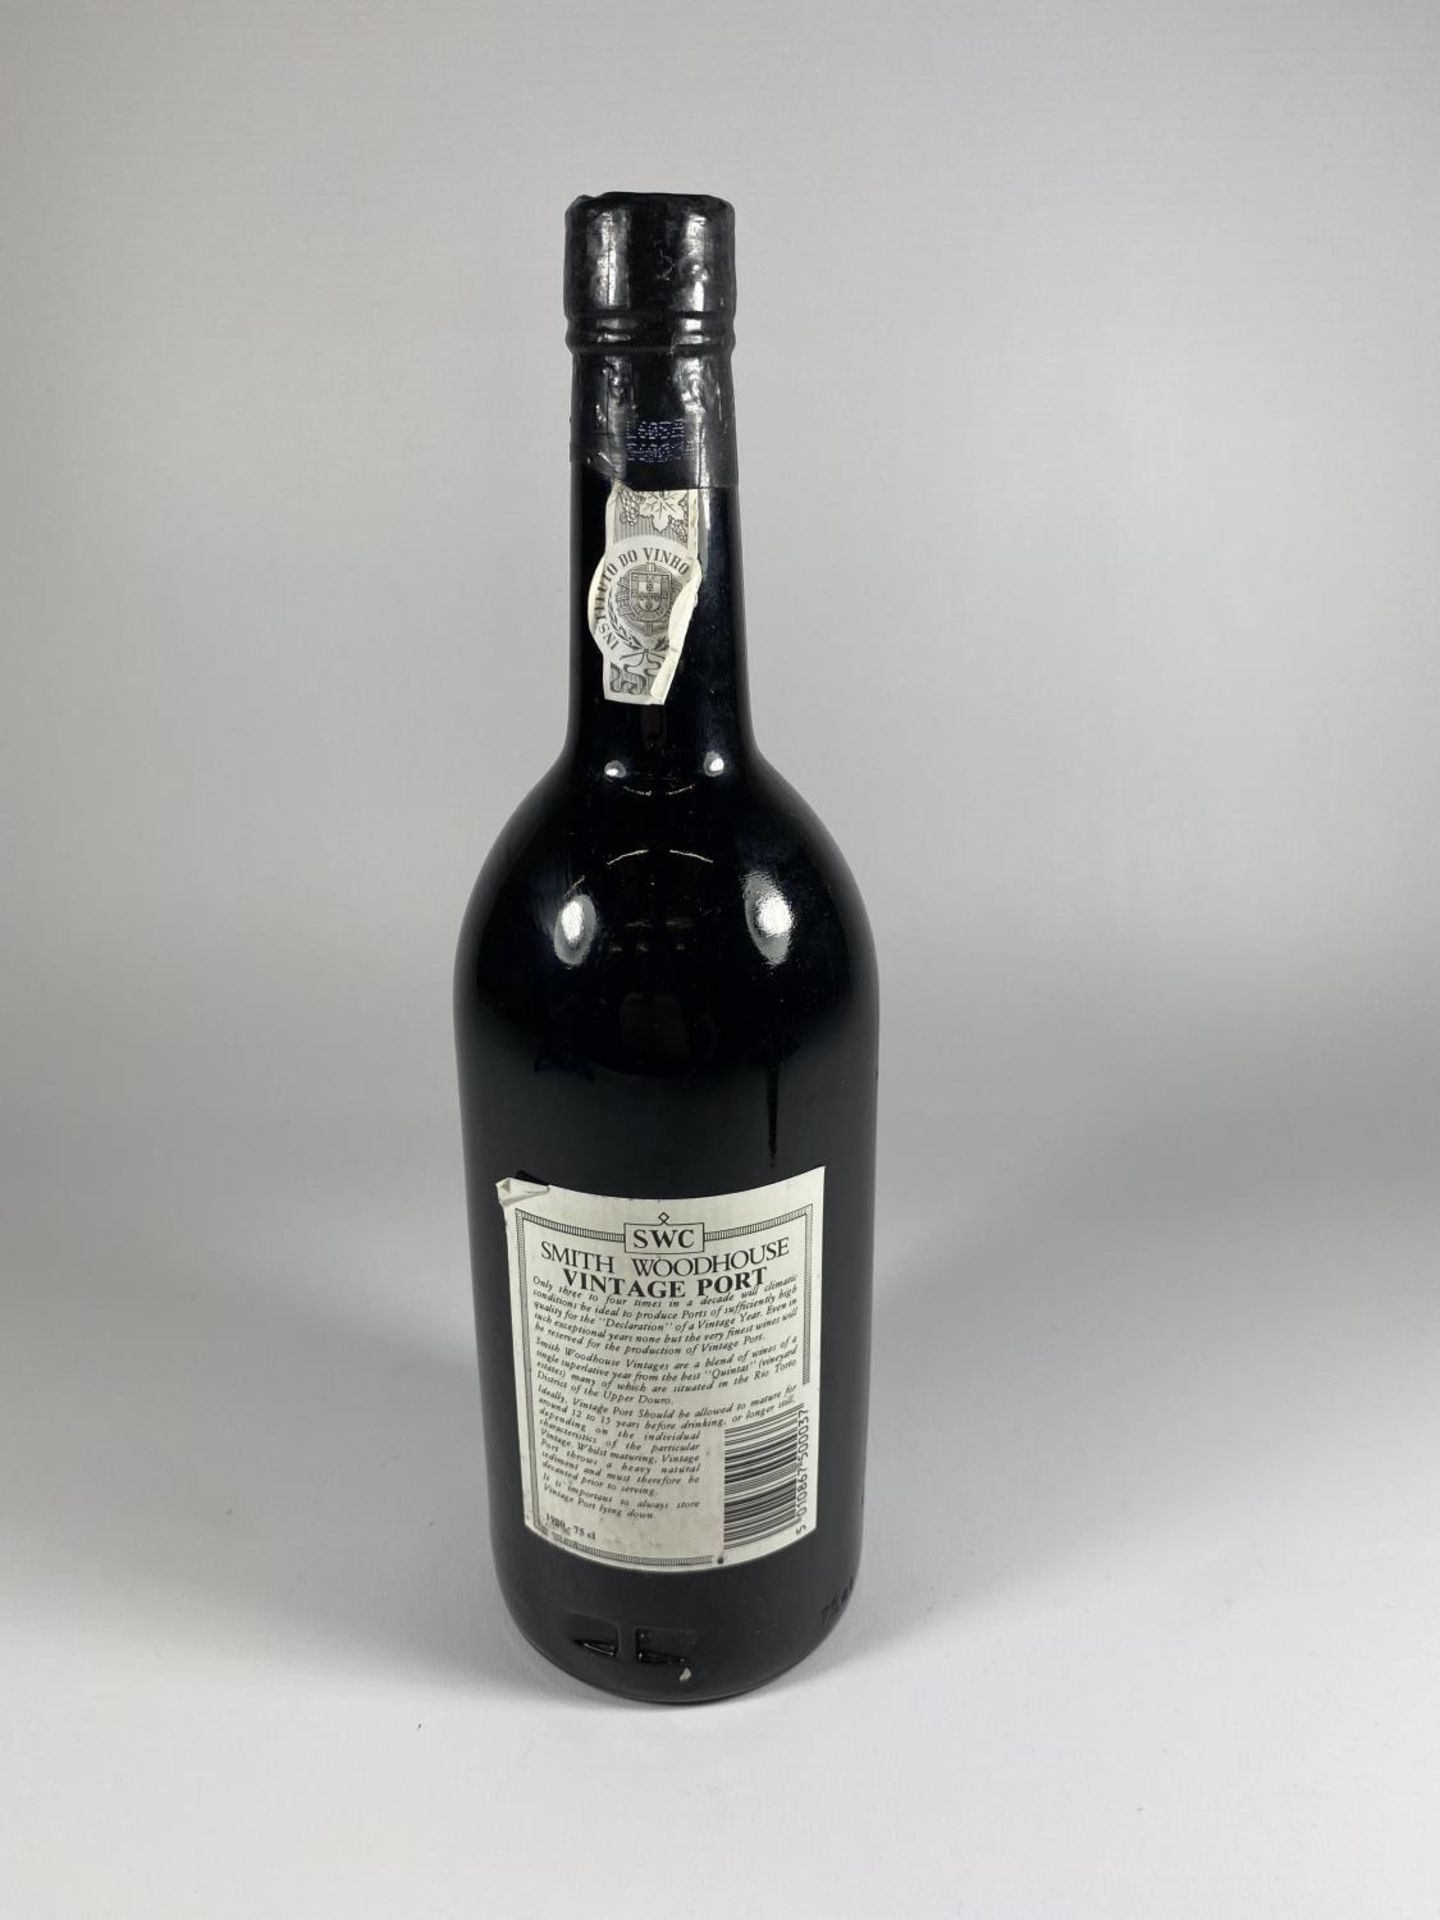 1 X 75CL BOTTLE - SMITH WOODHOUSE SWC 1980 VINTAGE PORT - Image 4 of 4